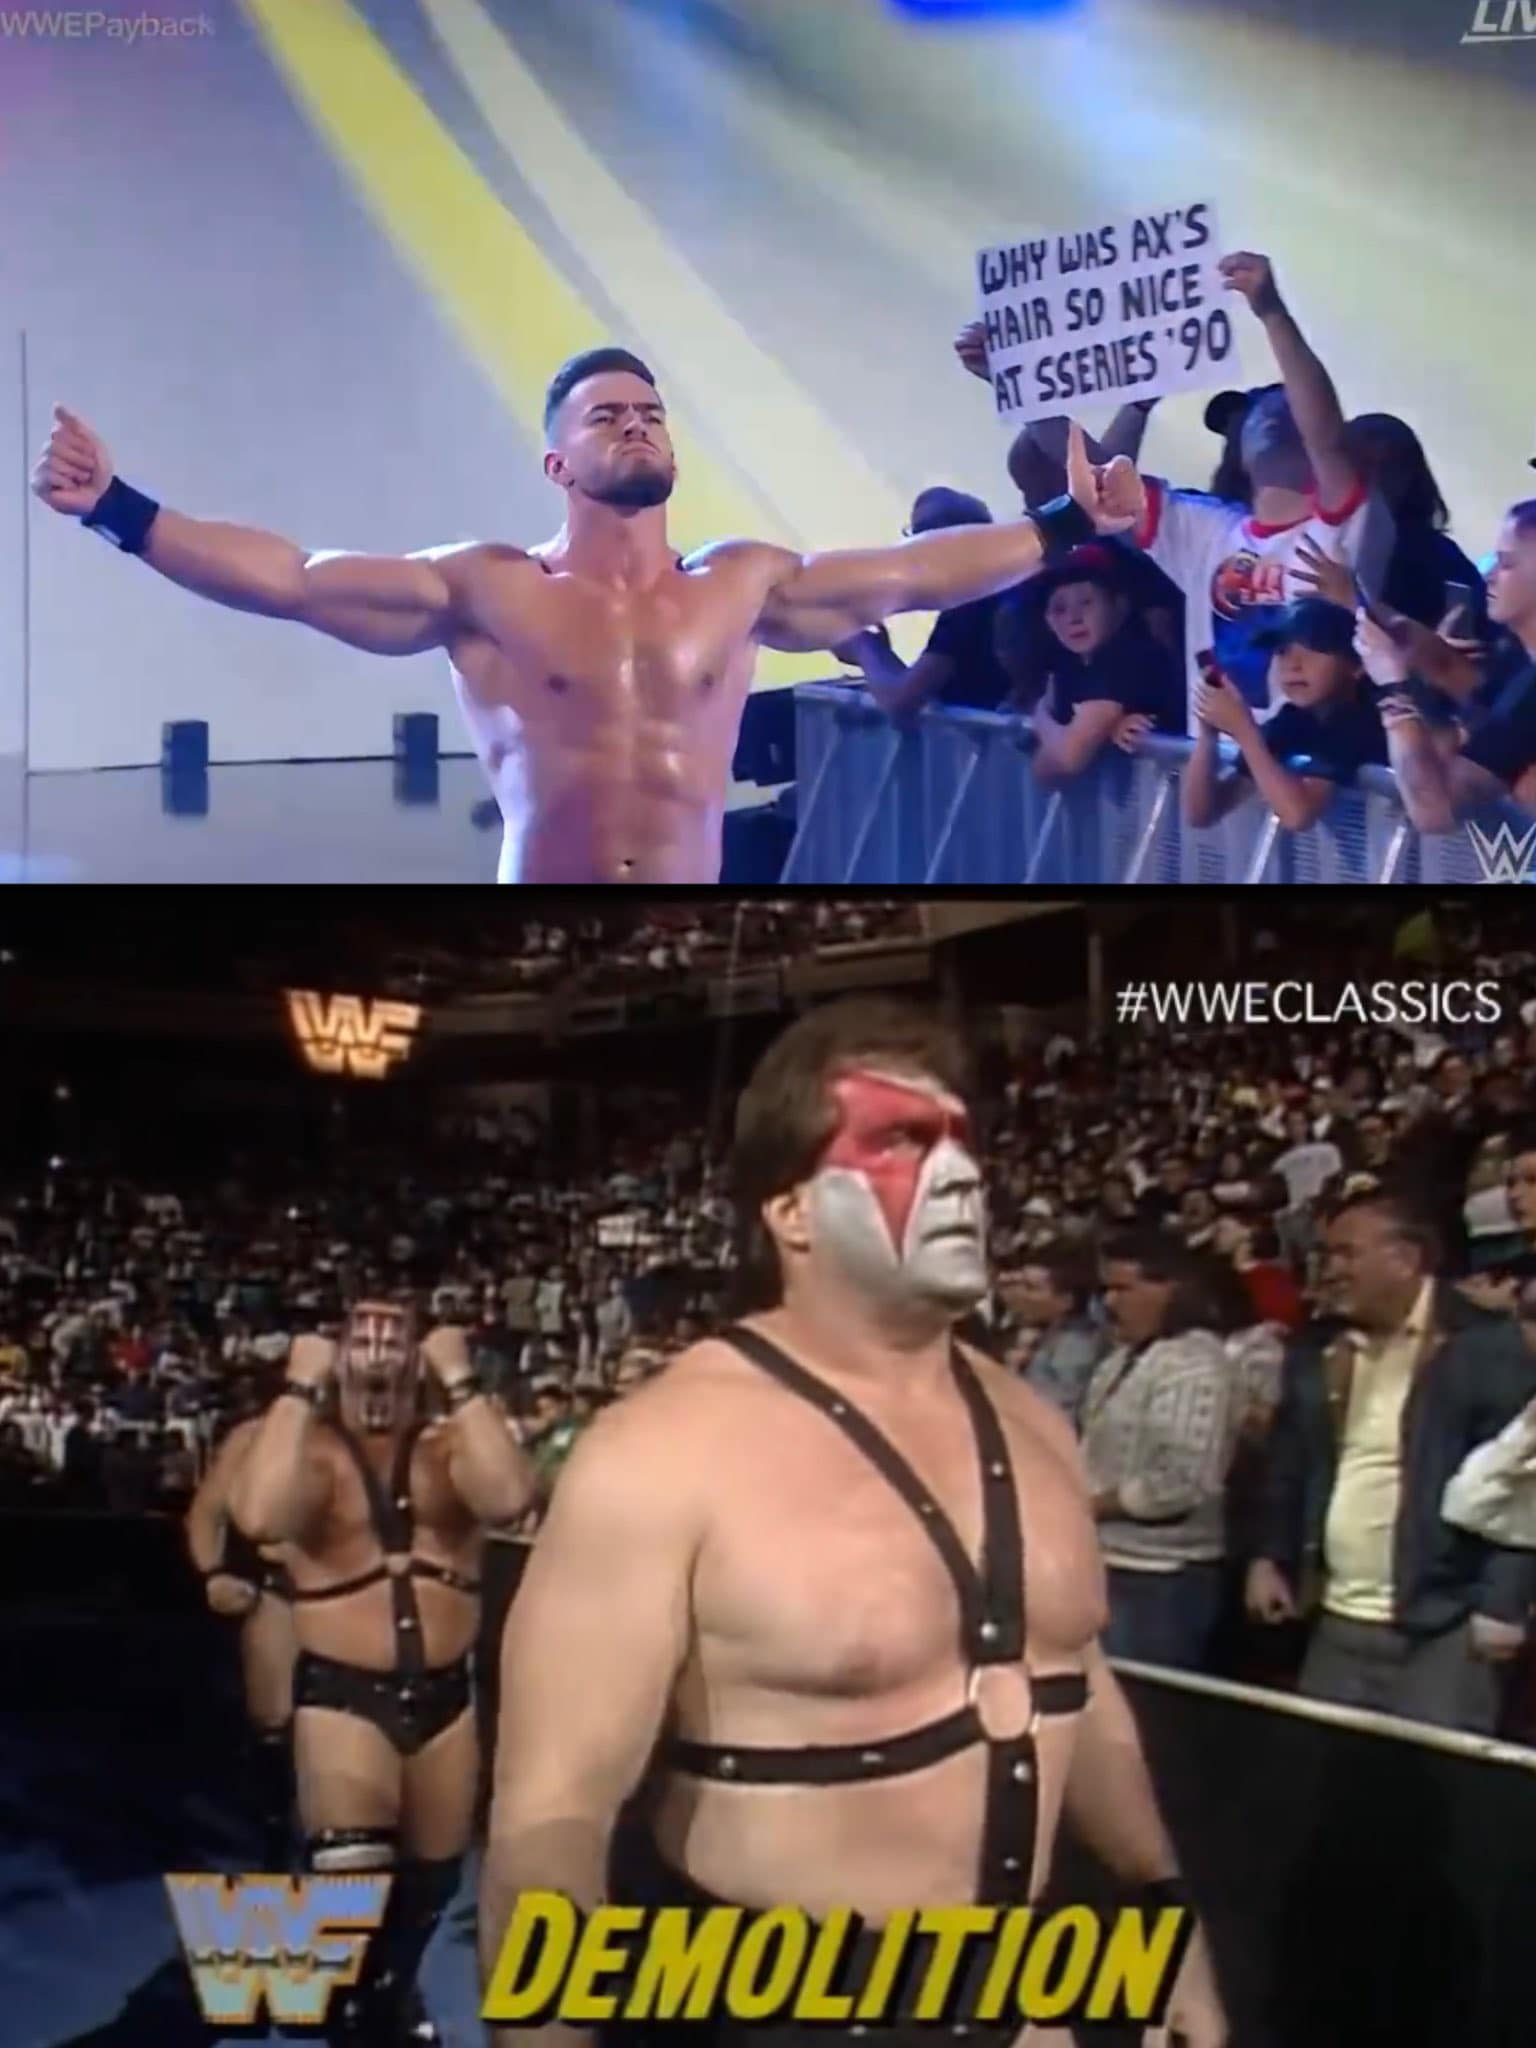 Why Was Demolition Ax Hair So Nice At WWF Survivor Series 1990 Fan Sign At WWE Payback 2023